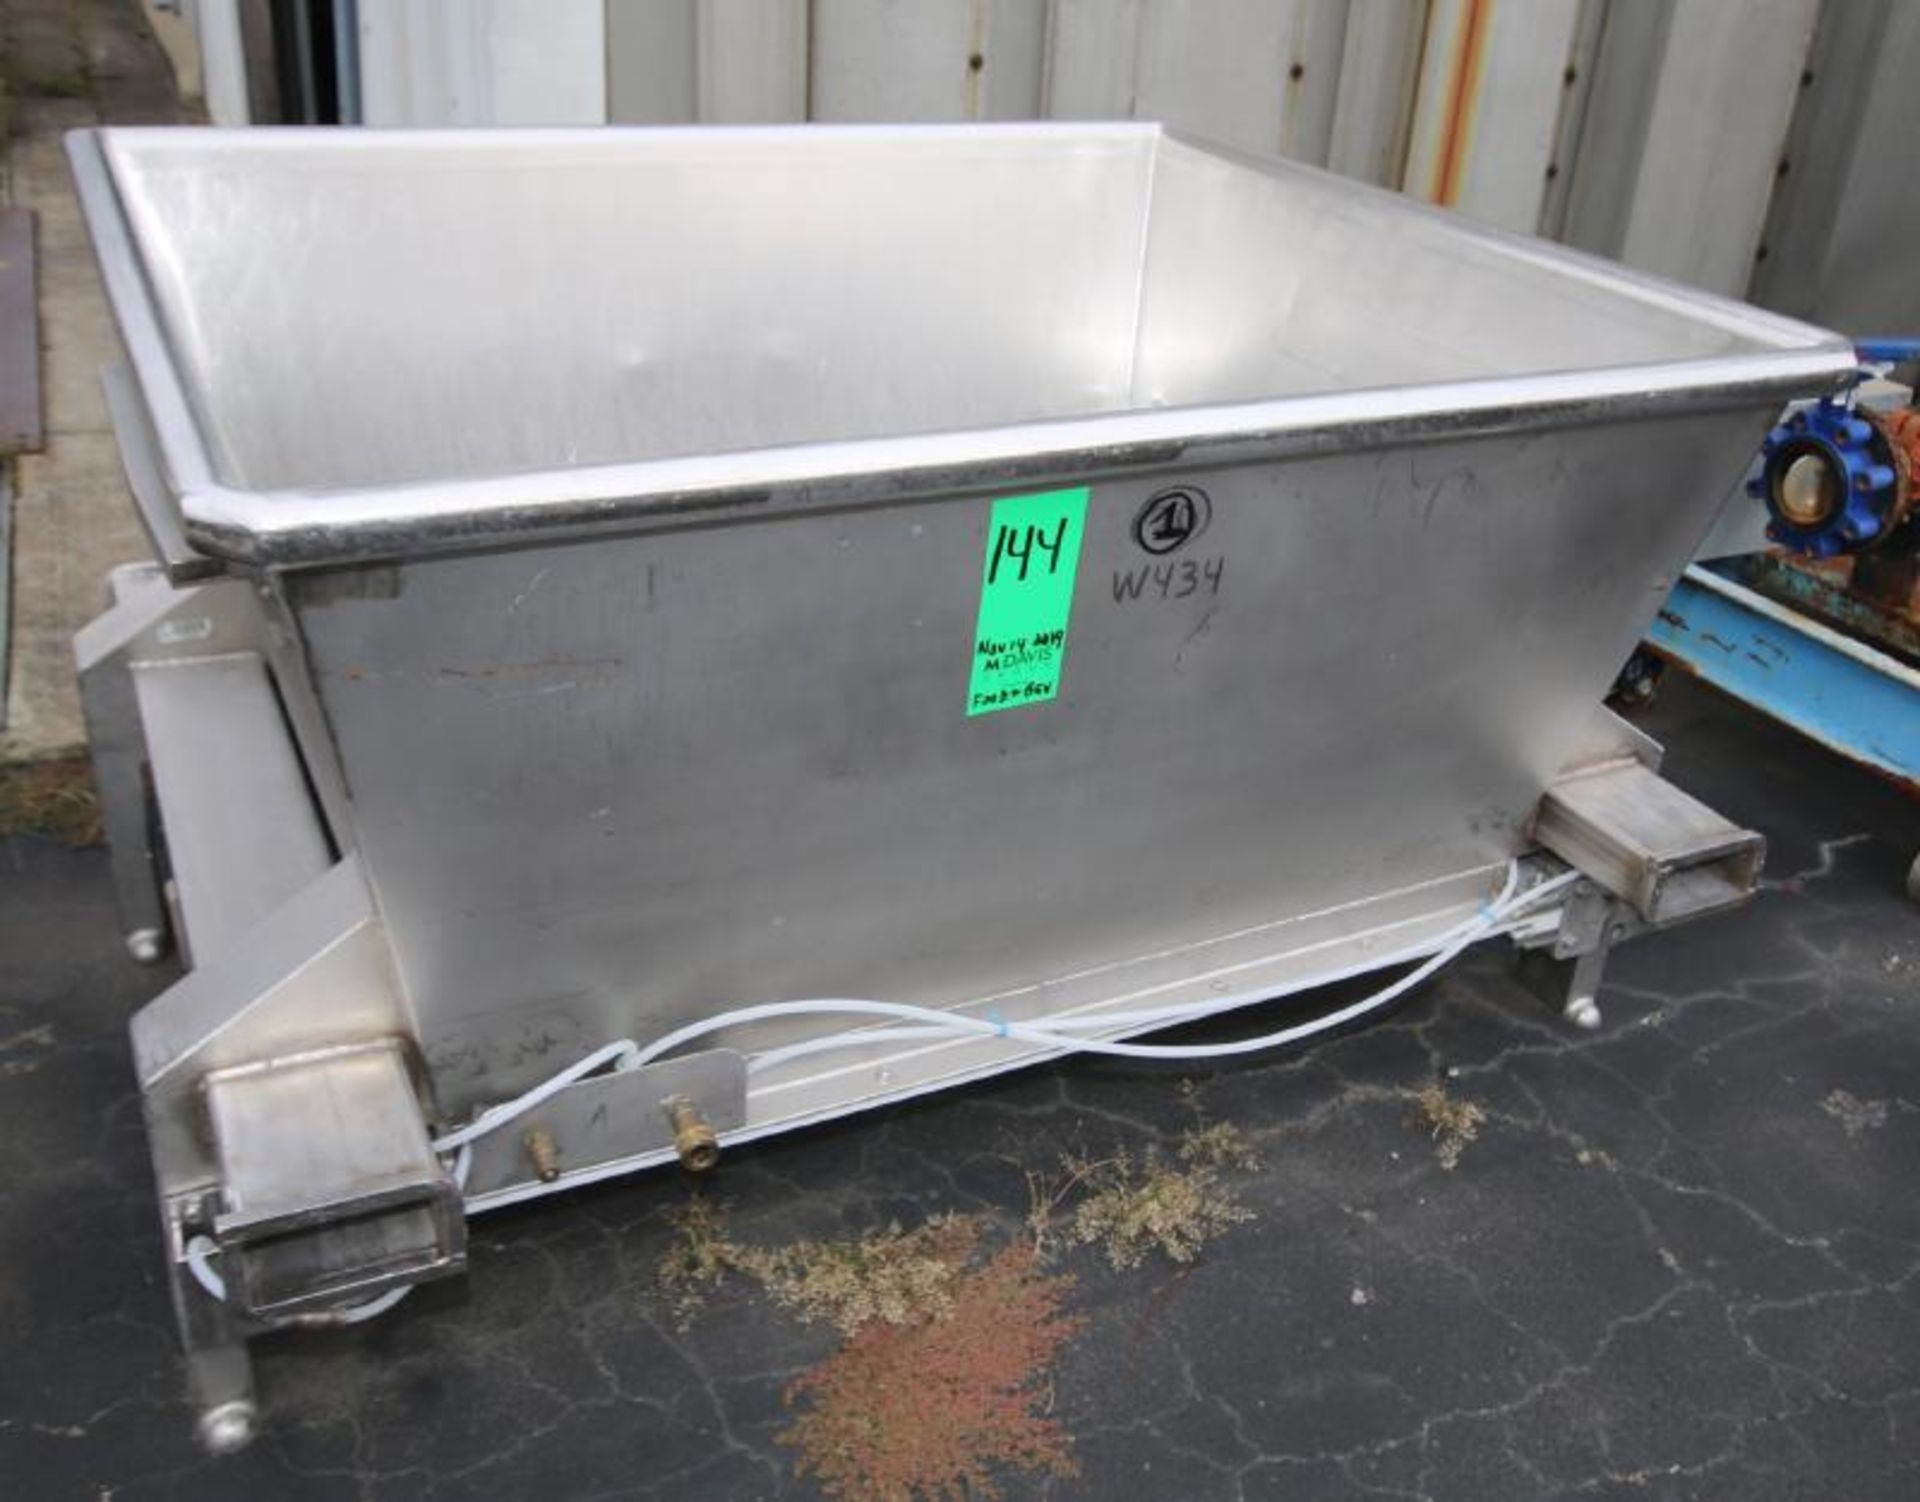 Aprox. 55" W x 48" L x 29" D S/S Trough / Hopper with Pneumatic Bottom (Located Pittsburgh, PA) - Image 3 of 3